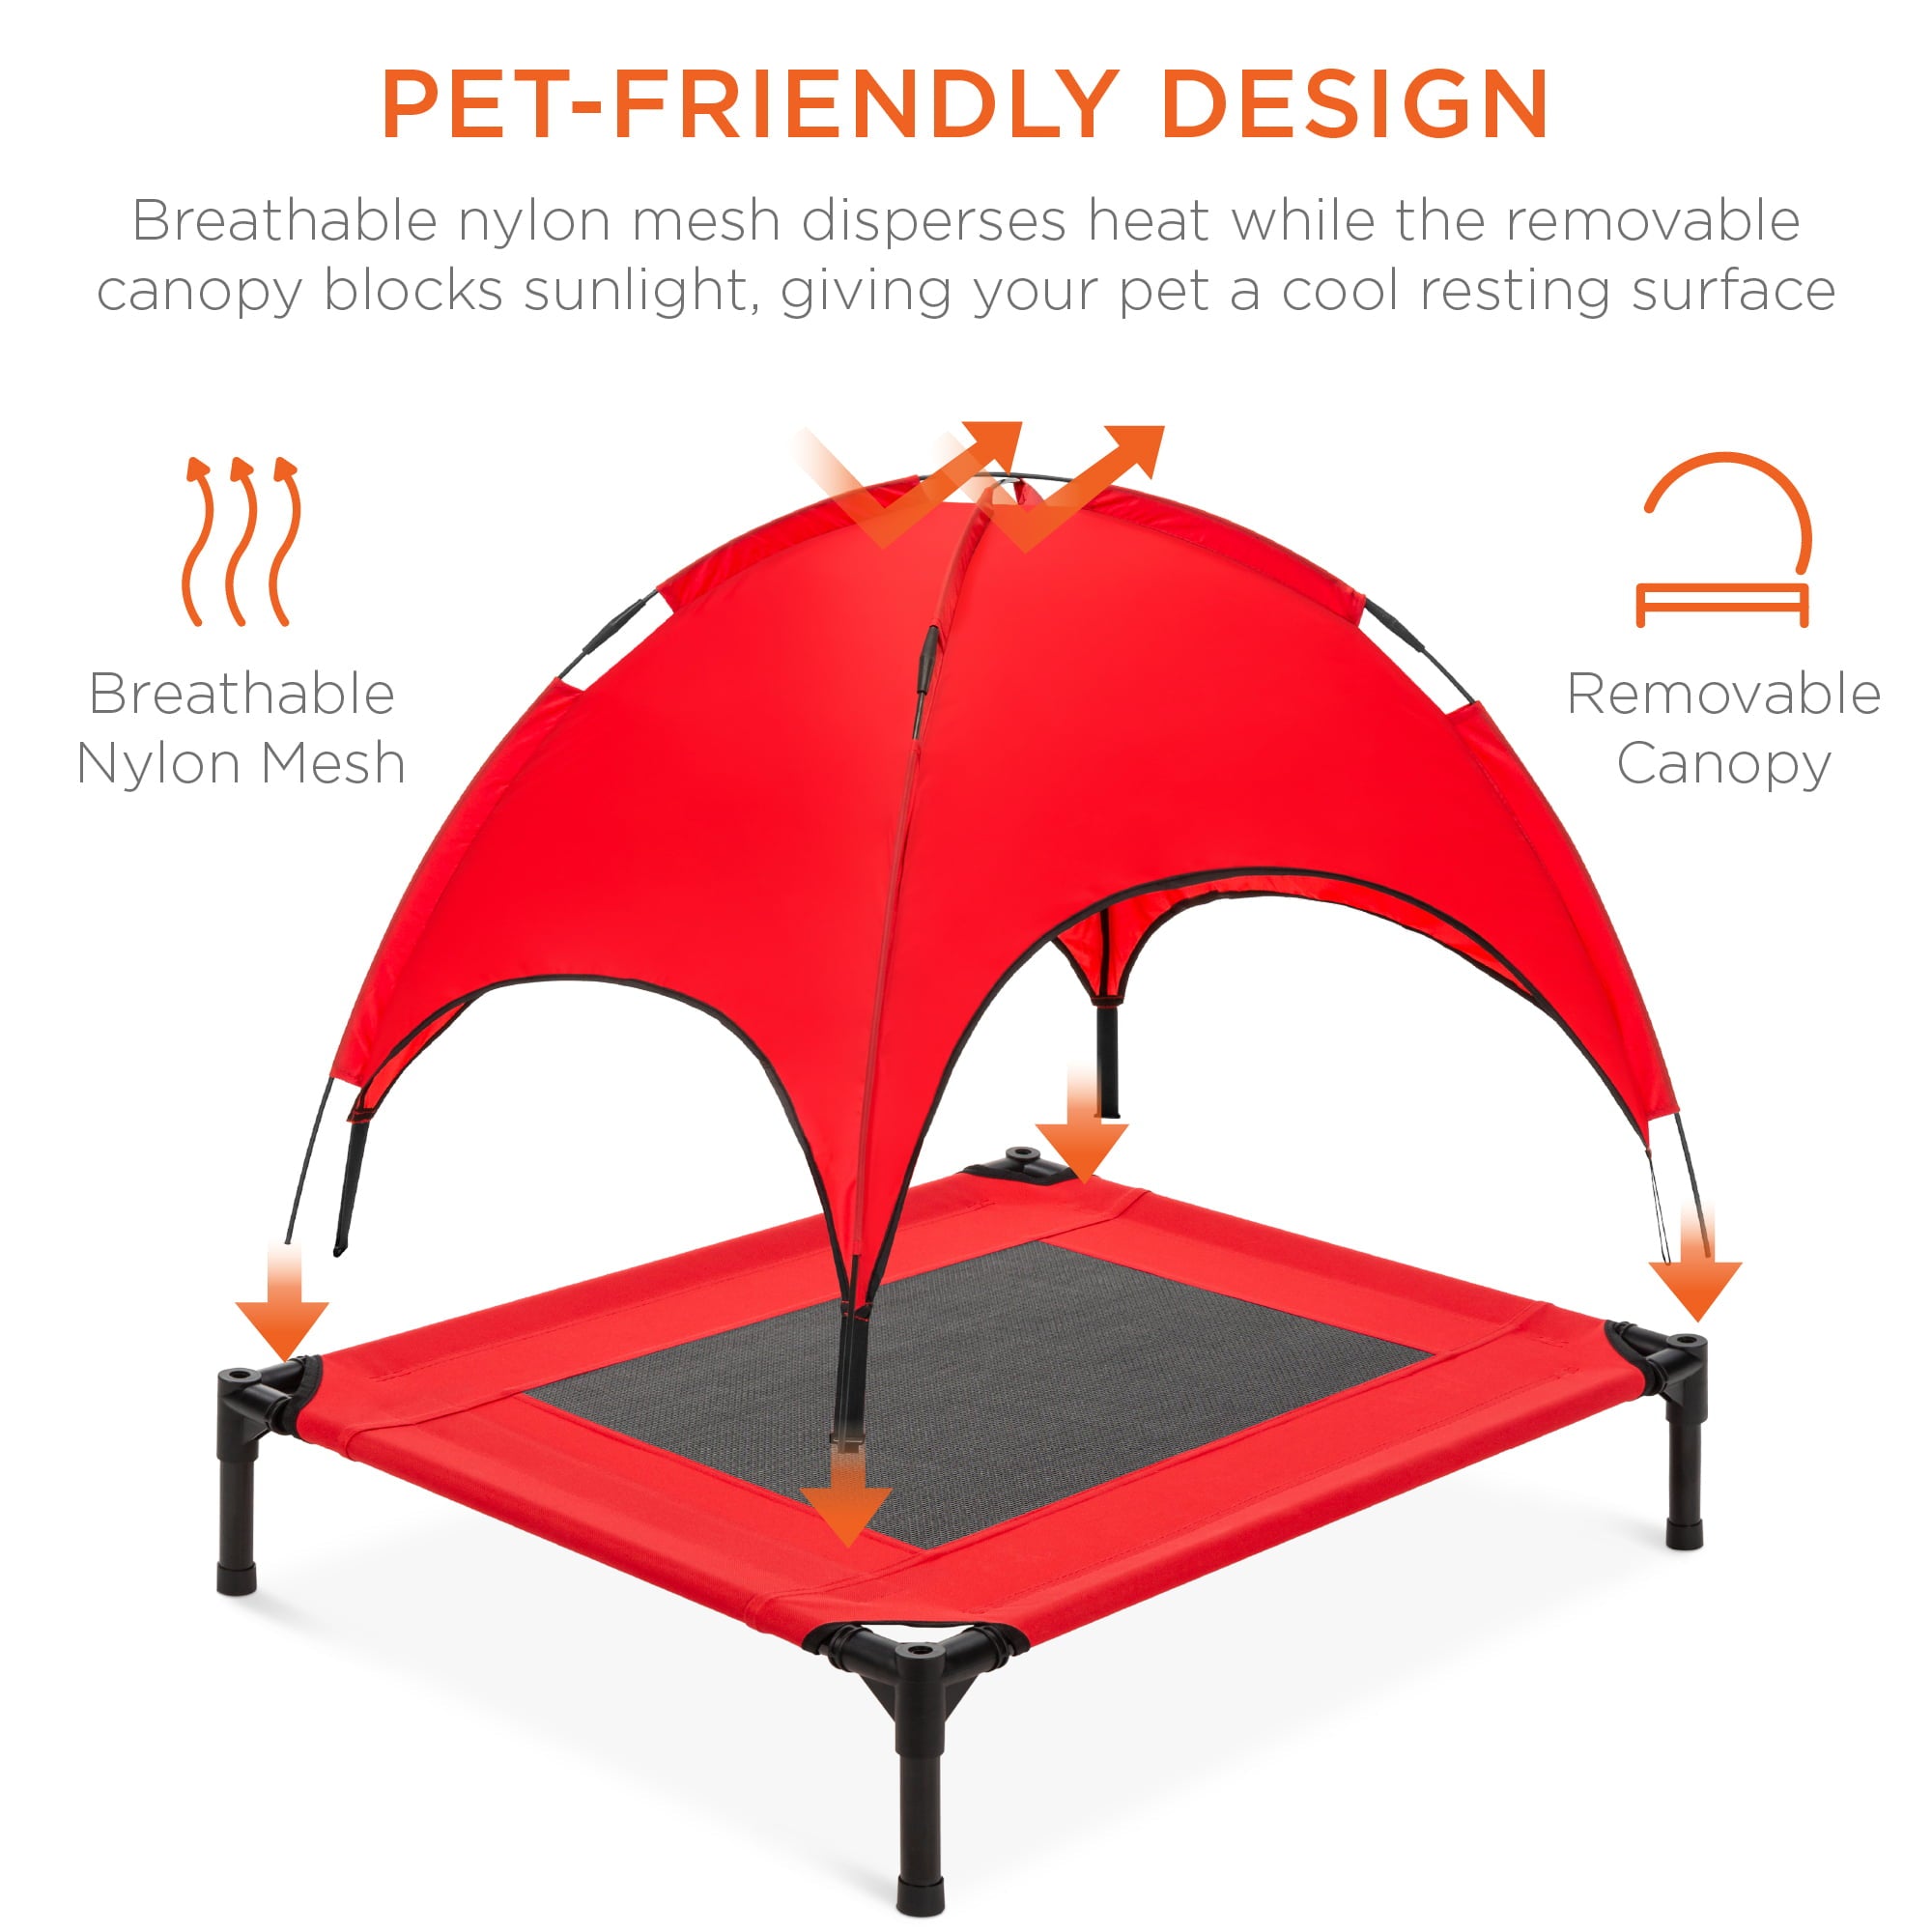 Best Choice Products 30in Elevated Cooling Dog Bed， Outdoor Raised Mesh Pet Cot w/ Removable Canopy， Carrying Bag - Red